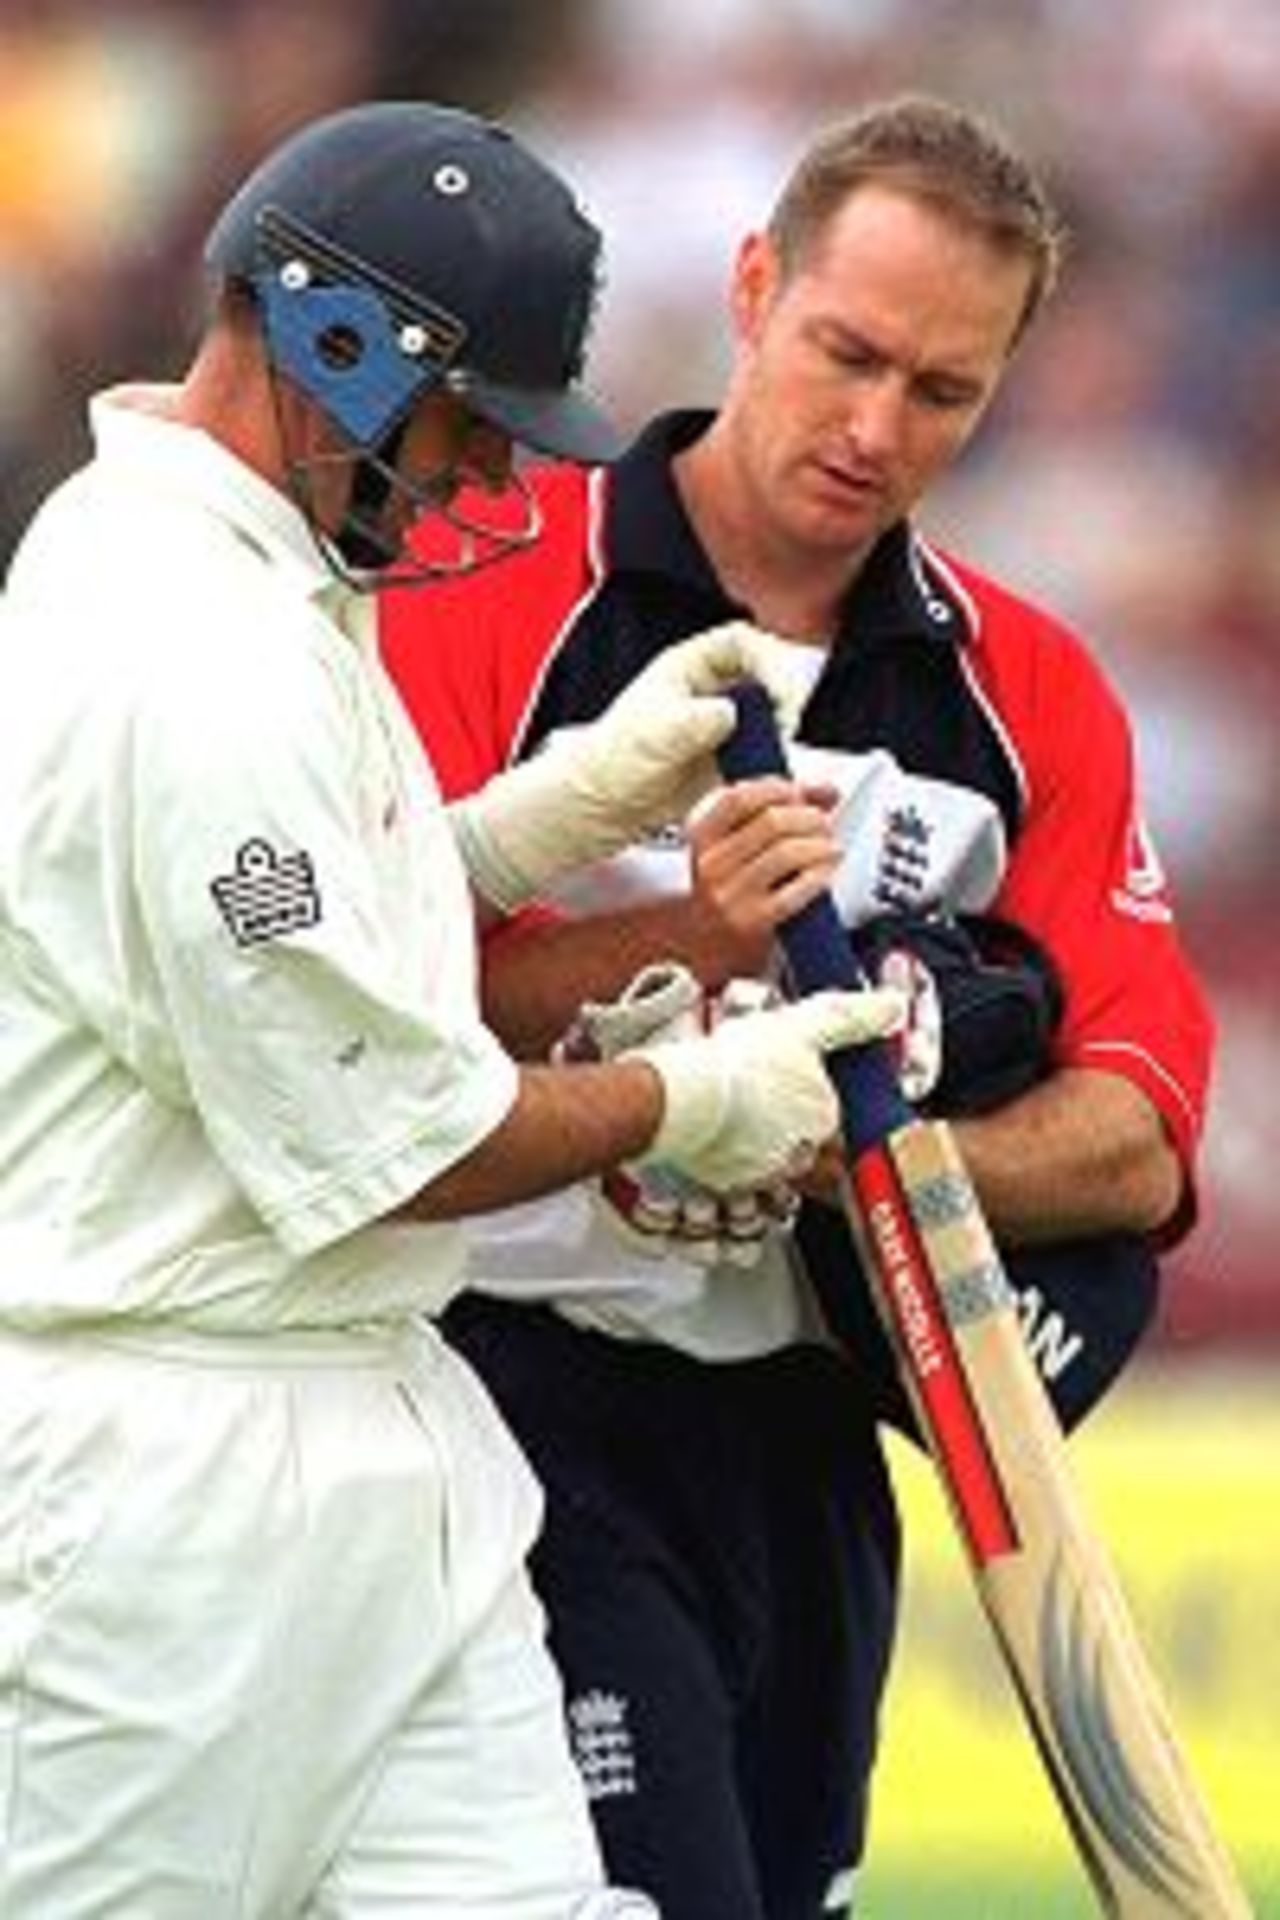 Nasser Hussain of England is treated after being hit on the hand off the ball of Jason Gillespie of Australia during the fourth day of the England v Australia first test match at Edgbaston, Birmingham.